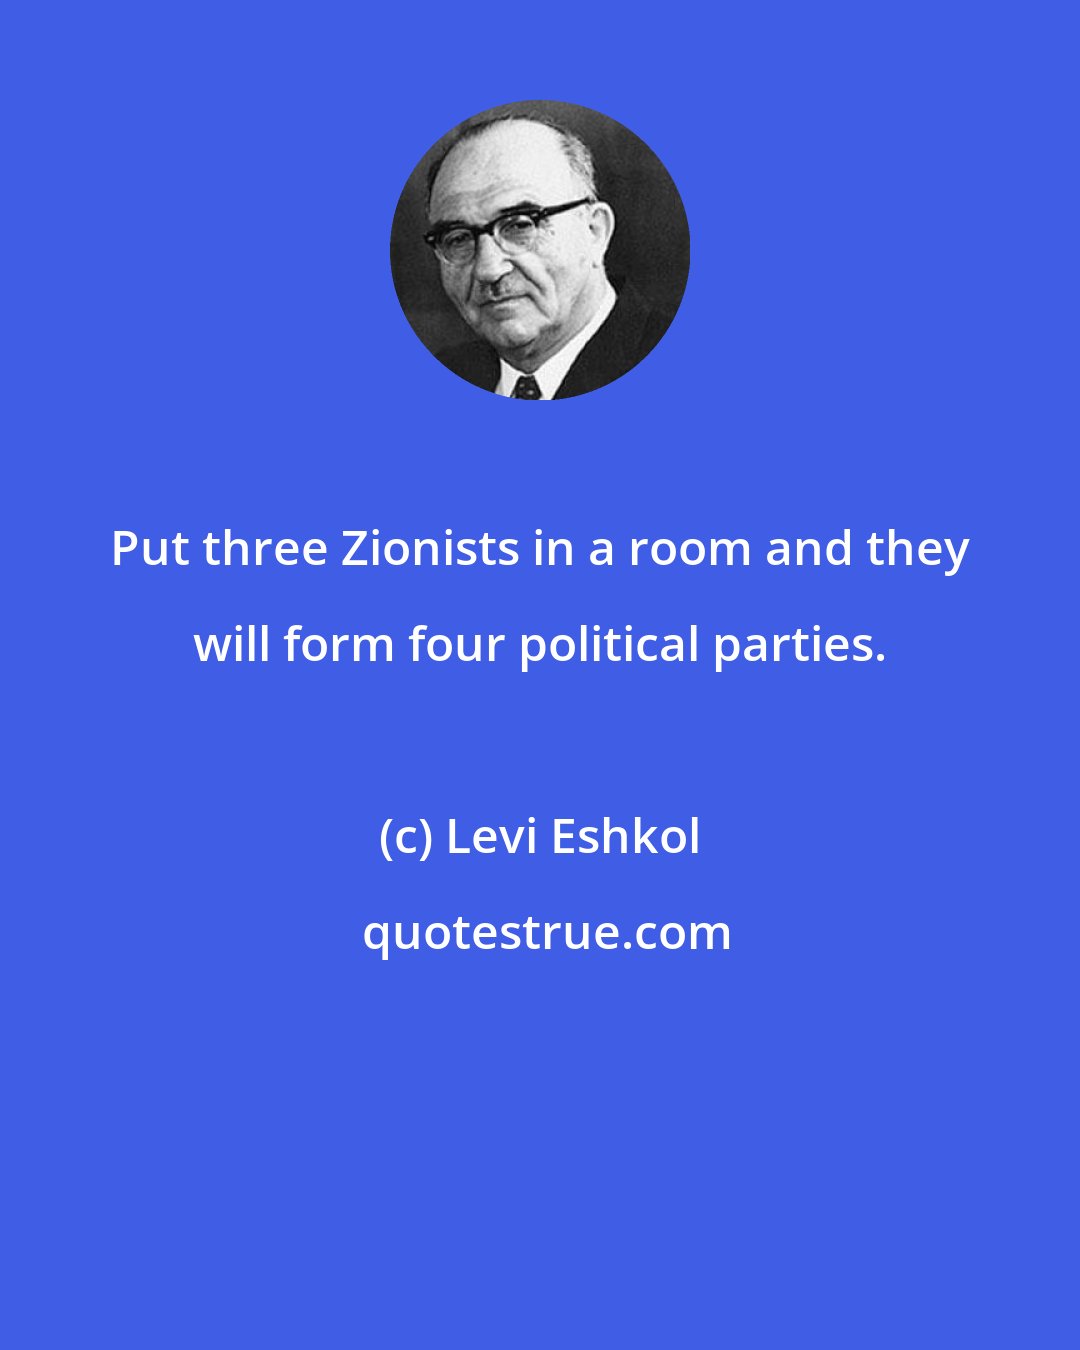 Levi Eshkol: Put three Zionists in a room and they will form four political parties.